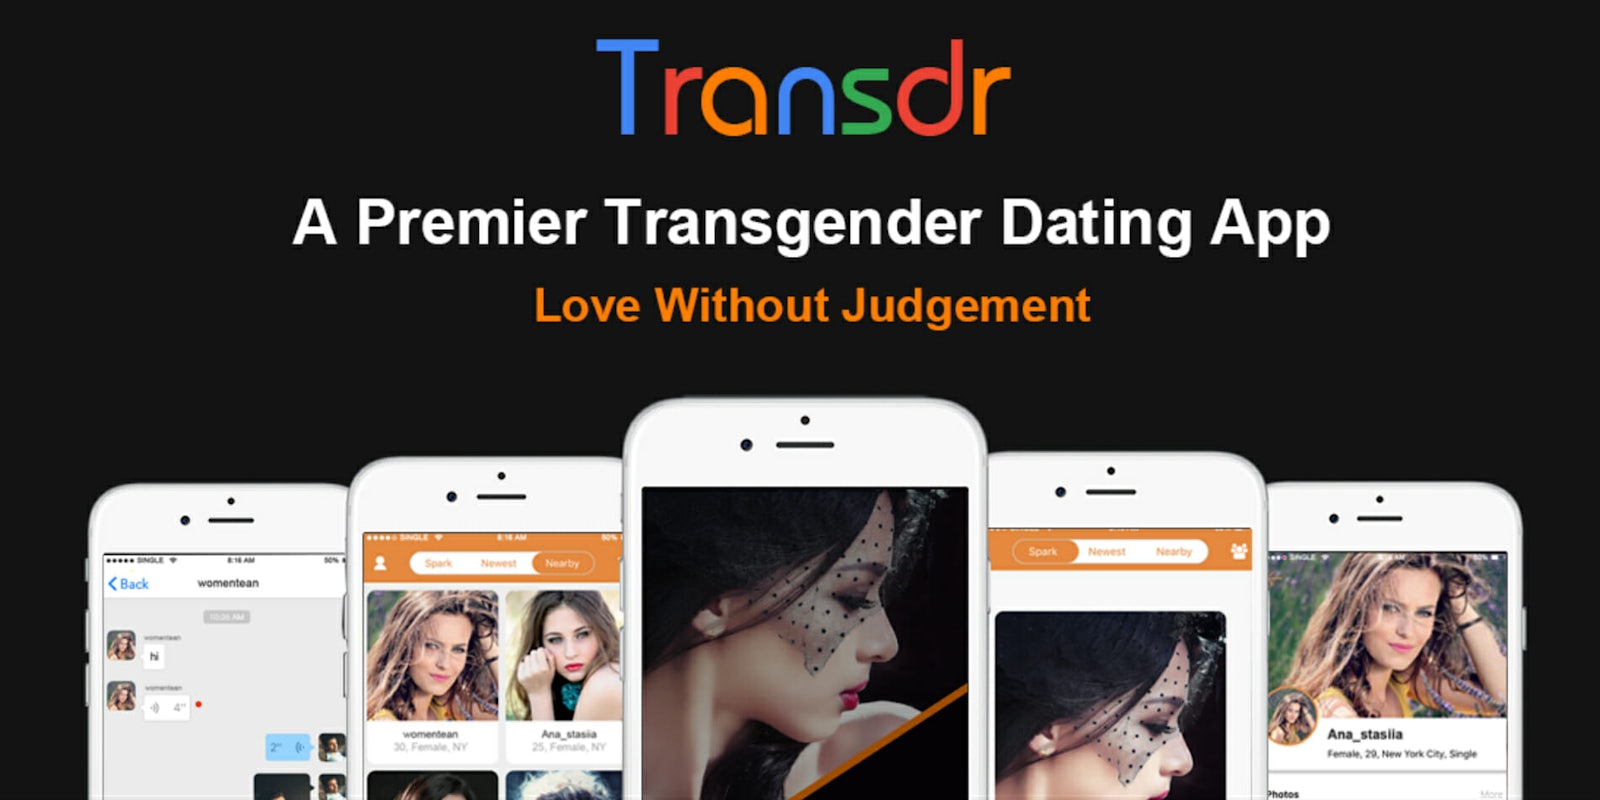 Transdr, the world's first 'transgender dating app,' isn't that inclusive.